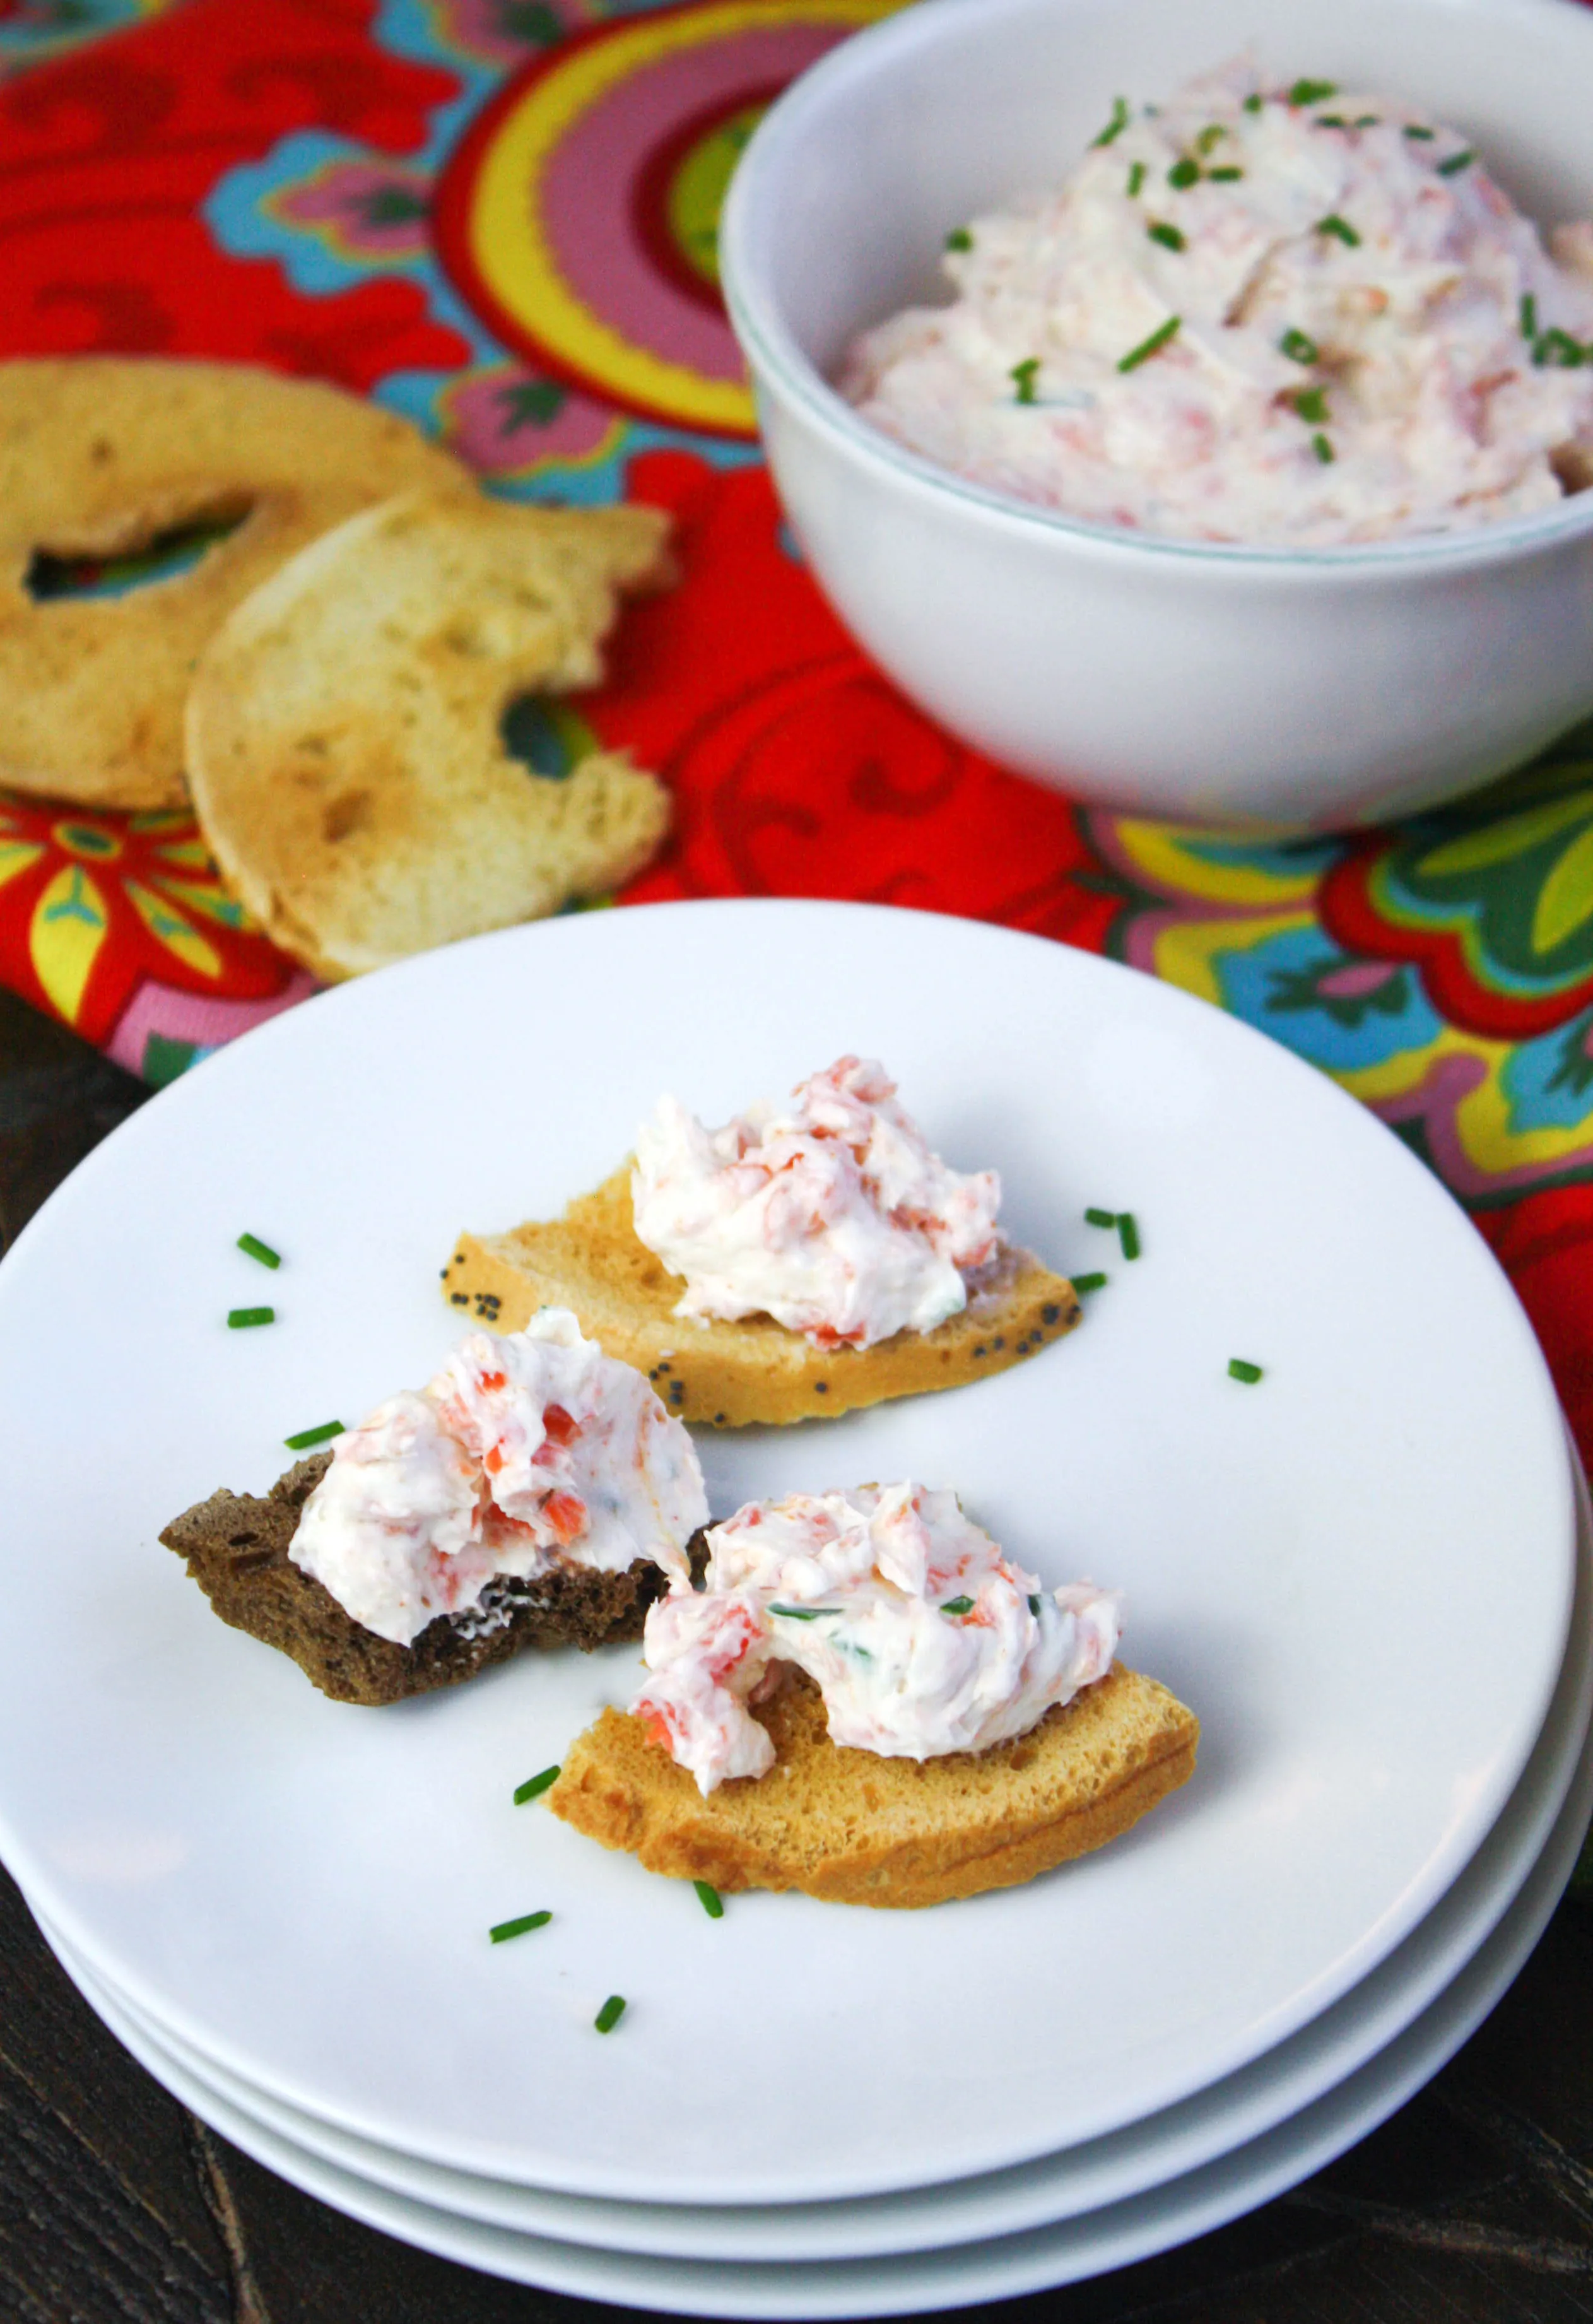 Simple Smoked Salmon Spread is an easy appetizer you'll love to serve! This salmon spread is a real treat for any get together.